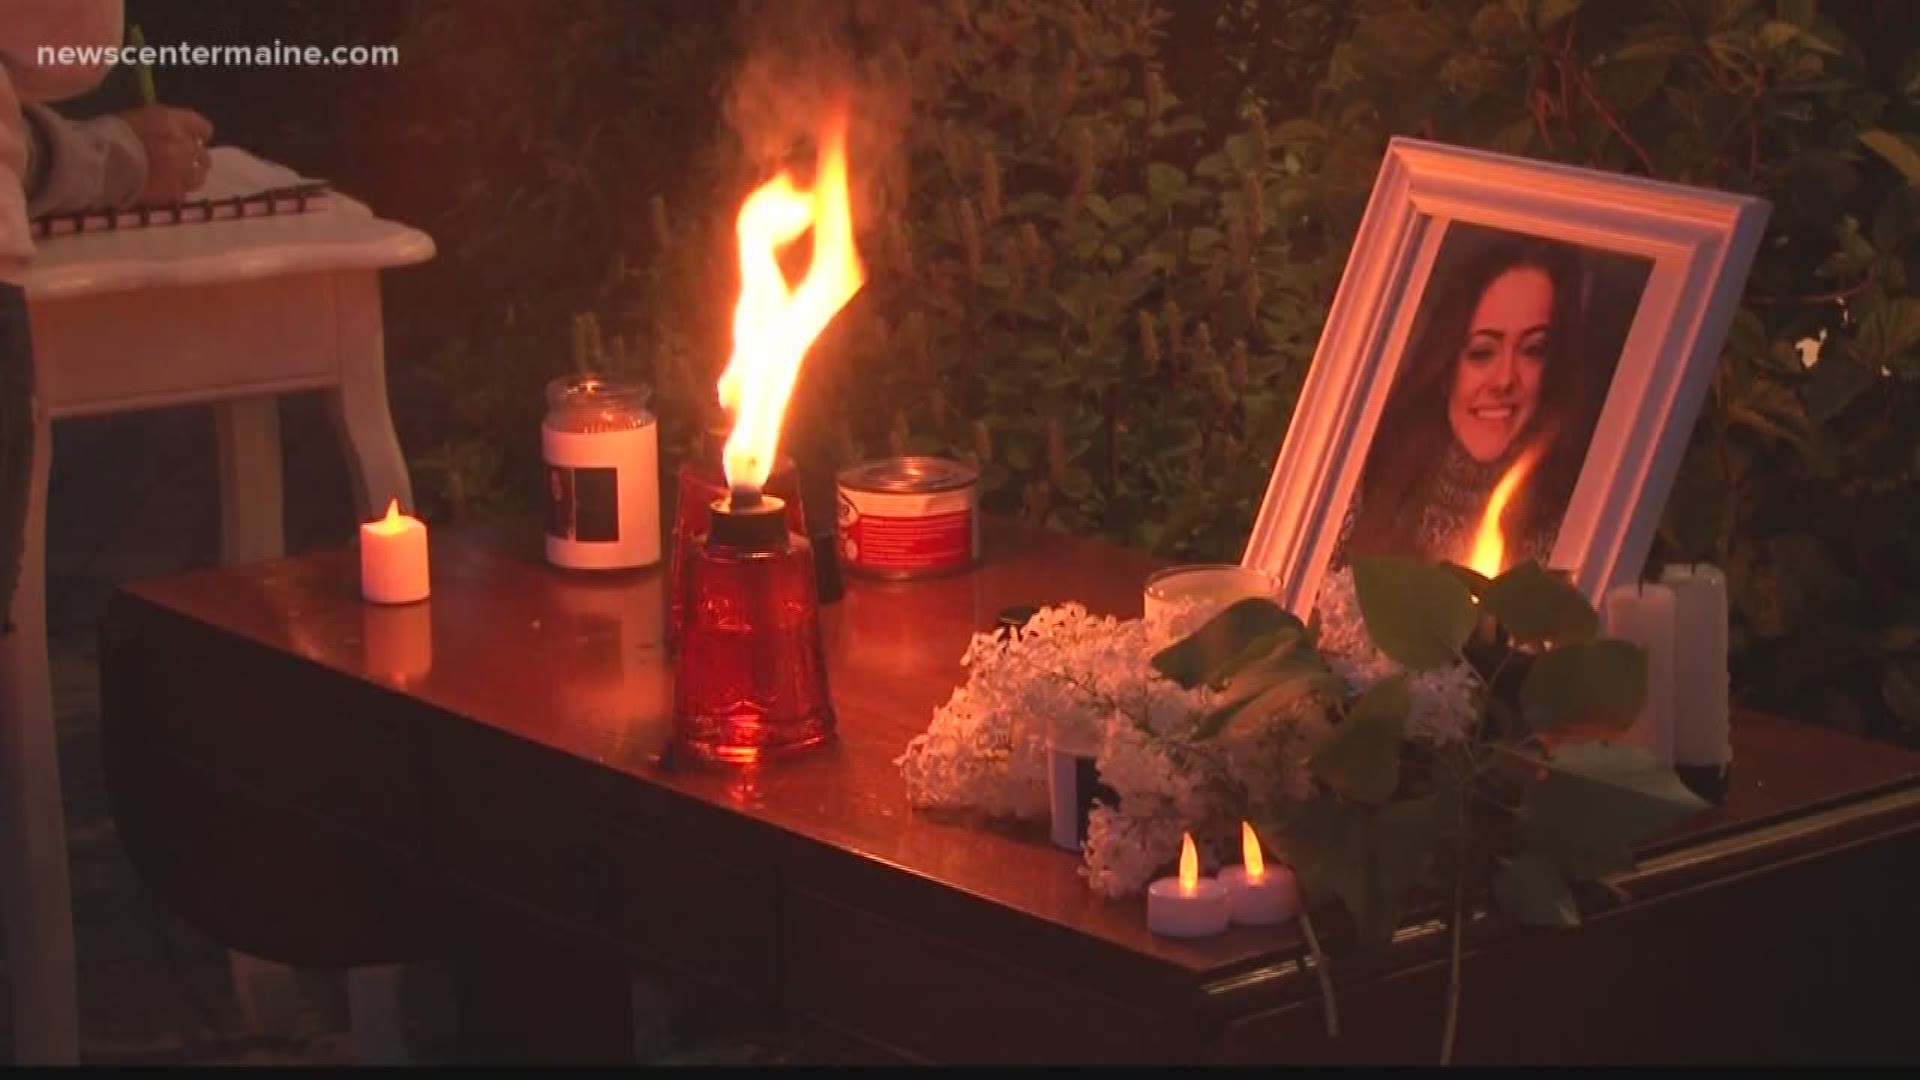 Candlelight vigil held for Mikaela Conley